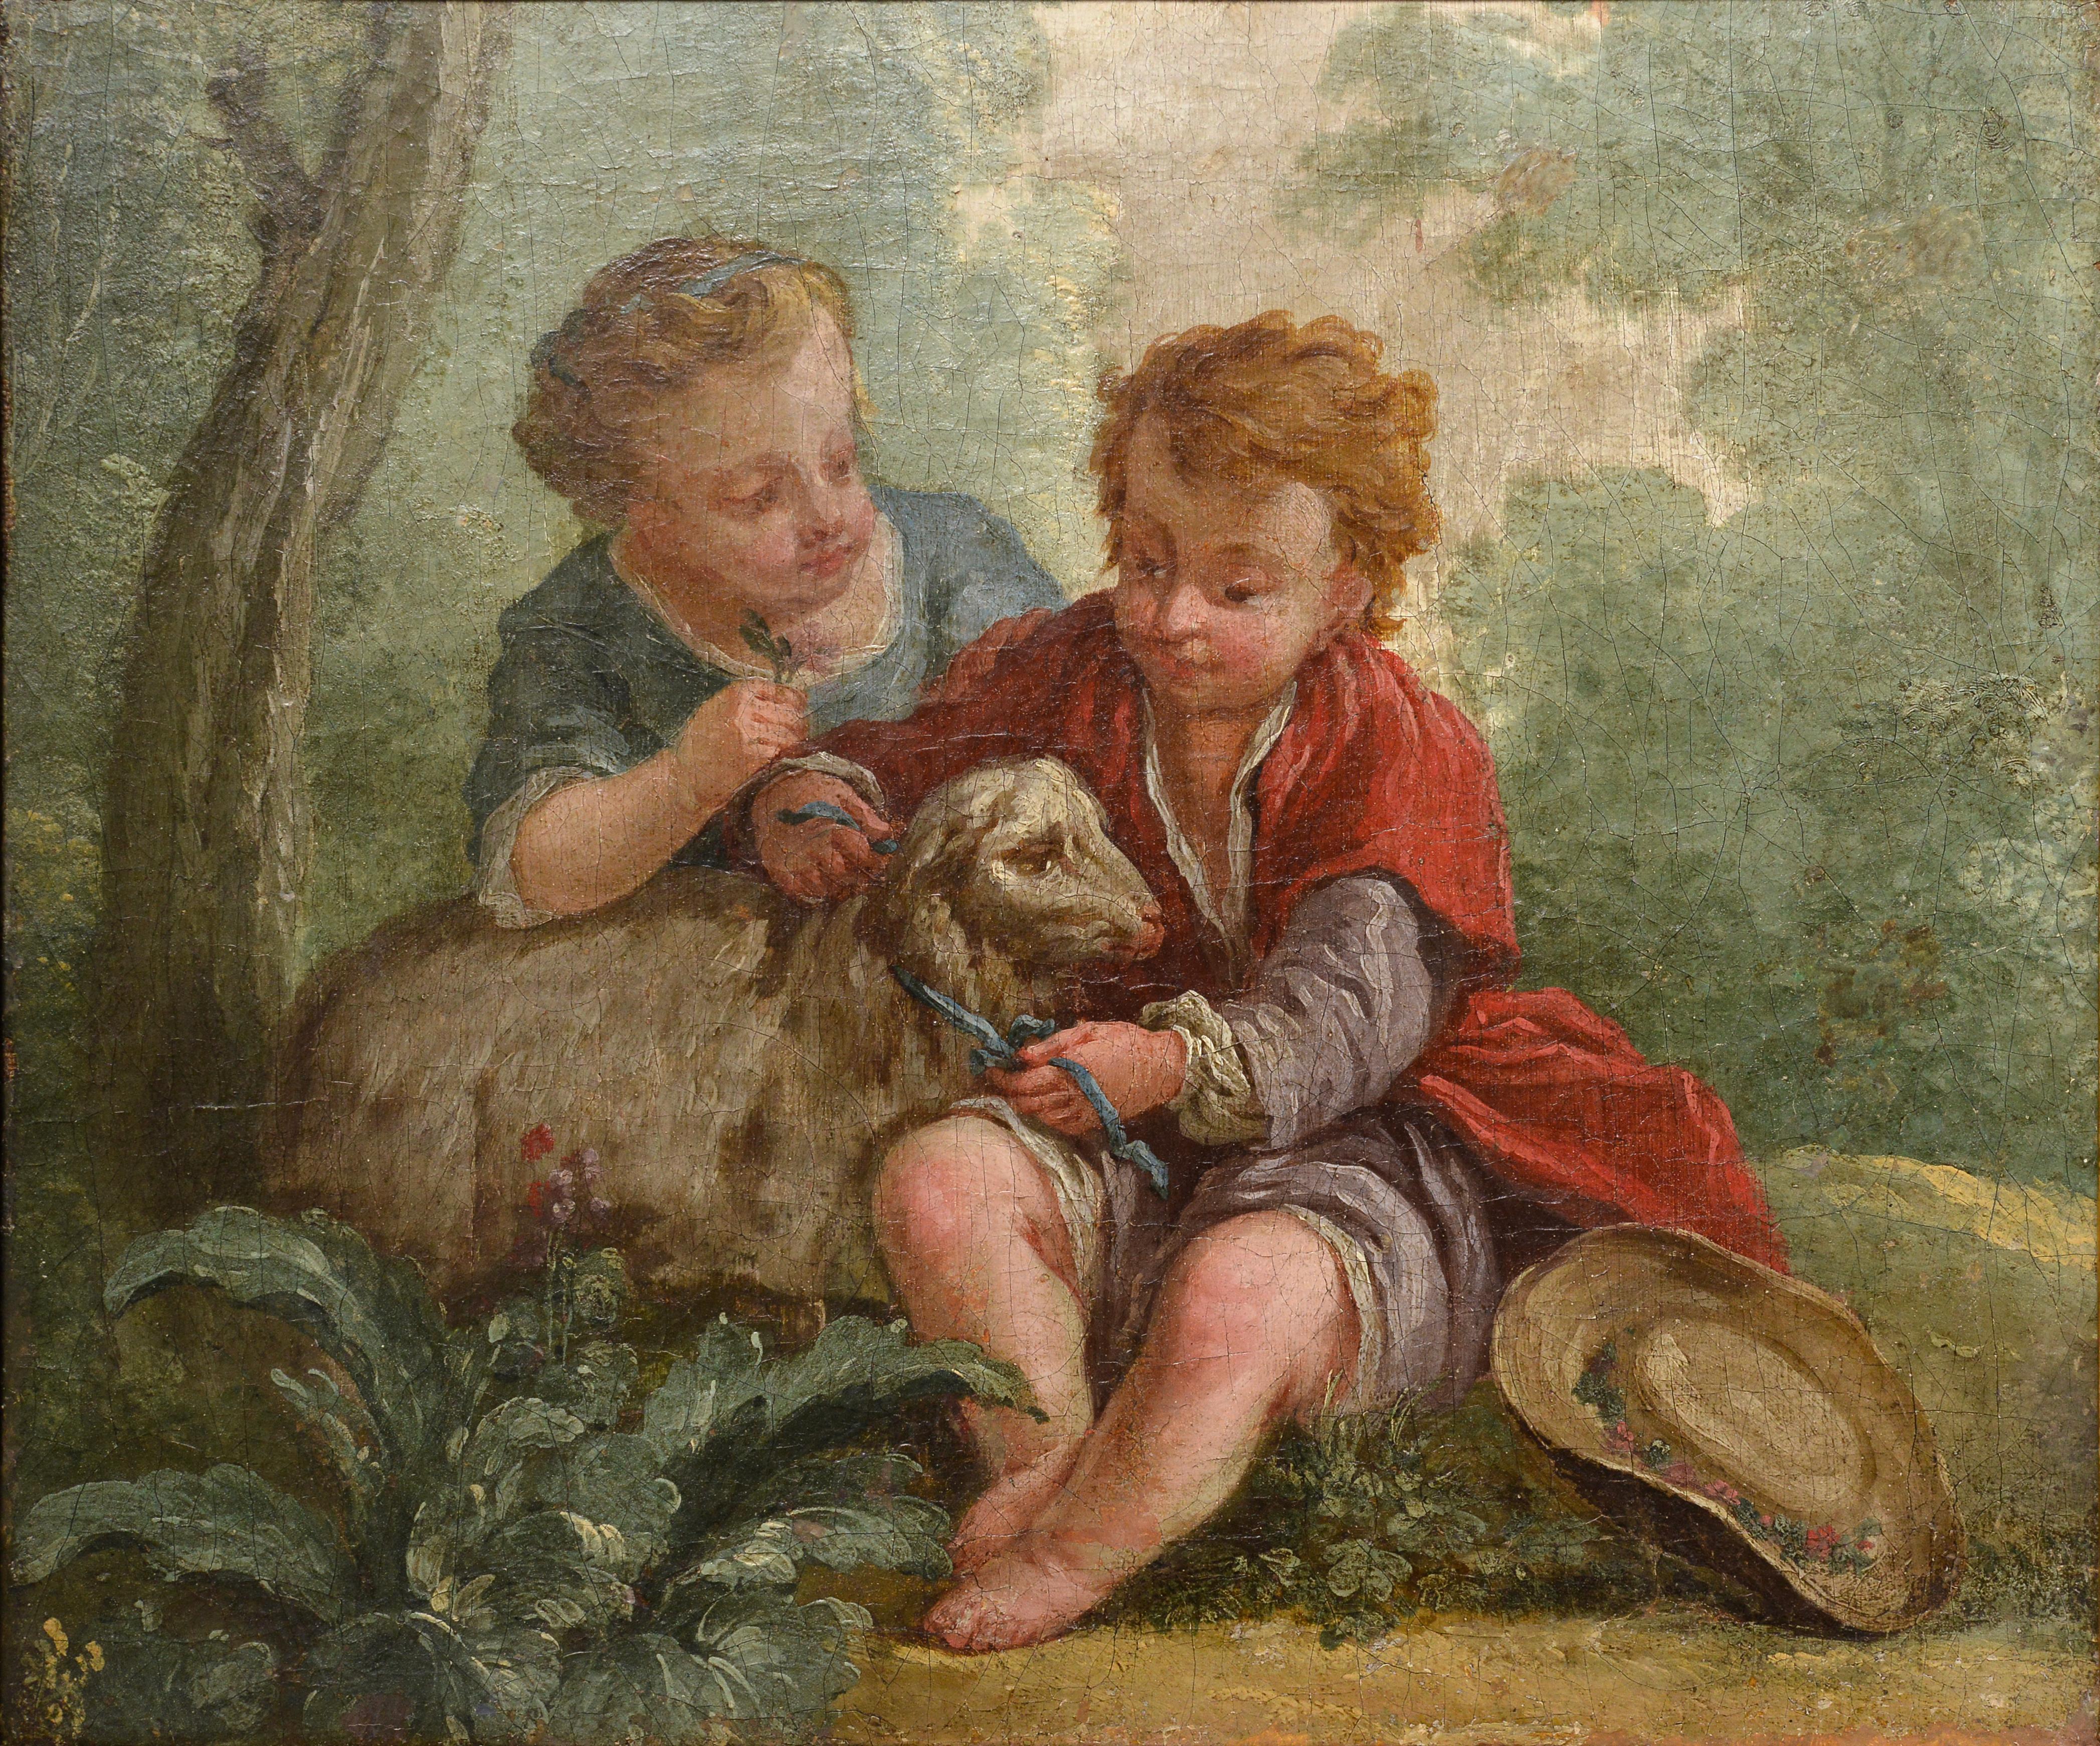 Children w Lamb Scene 18th century Oil painting by French Rococo Master - Painting by Jean Baptist Marie Huet